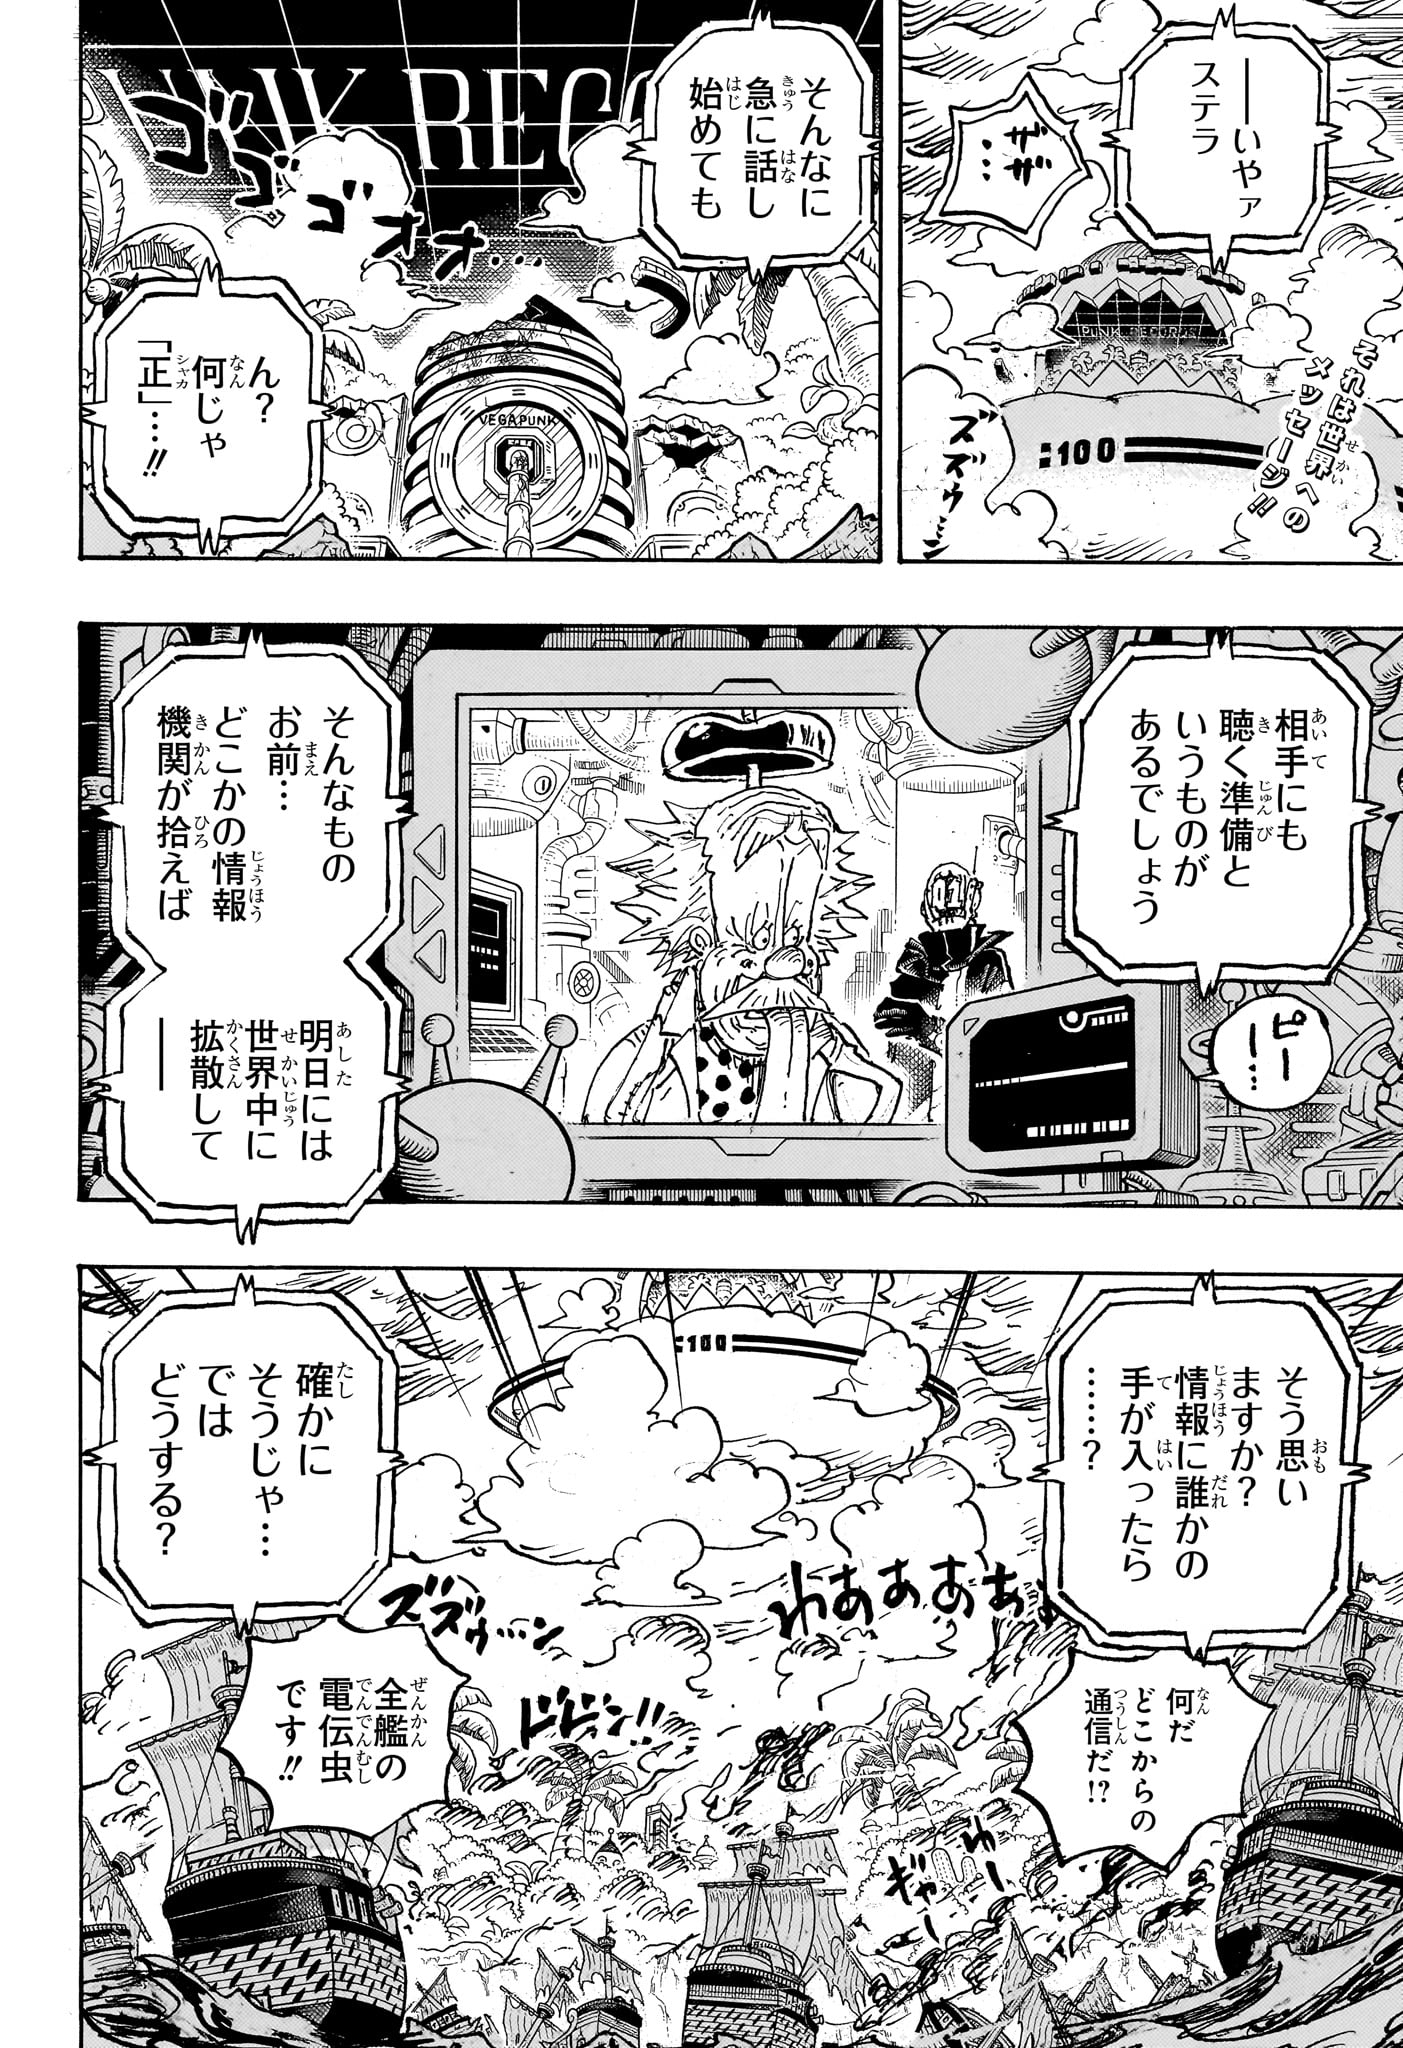 One Piece - Chapter 1109 - Page 2